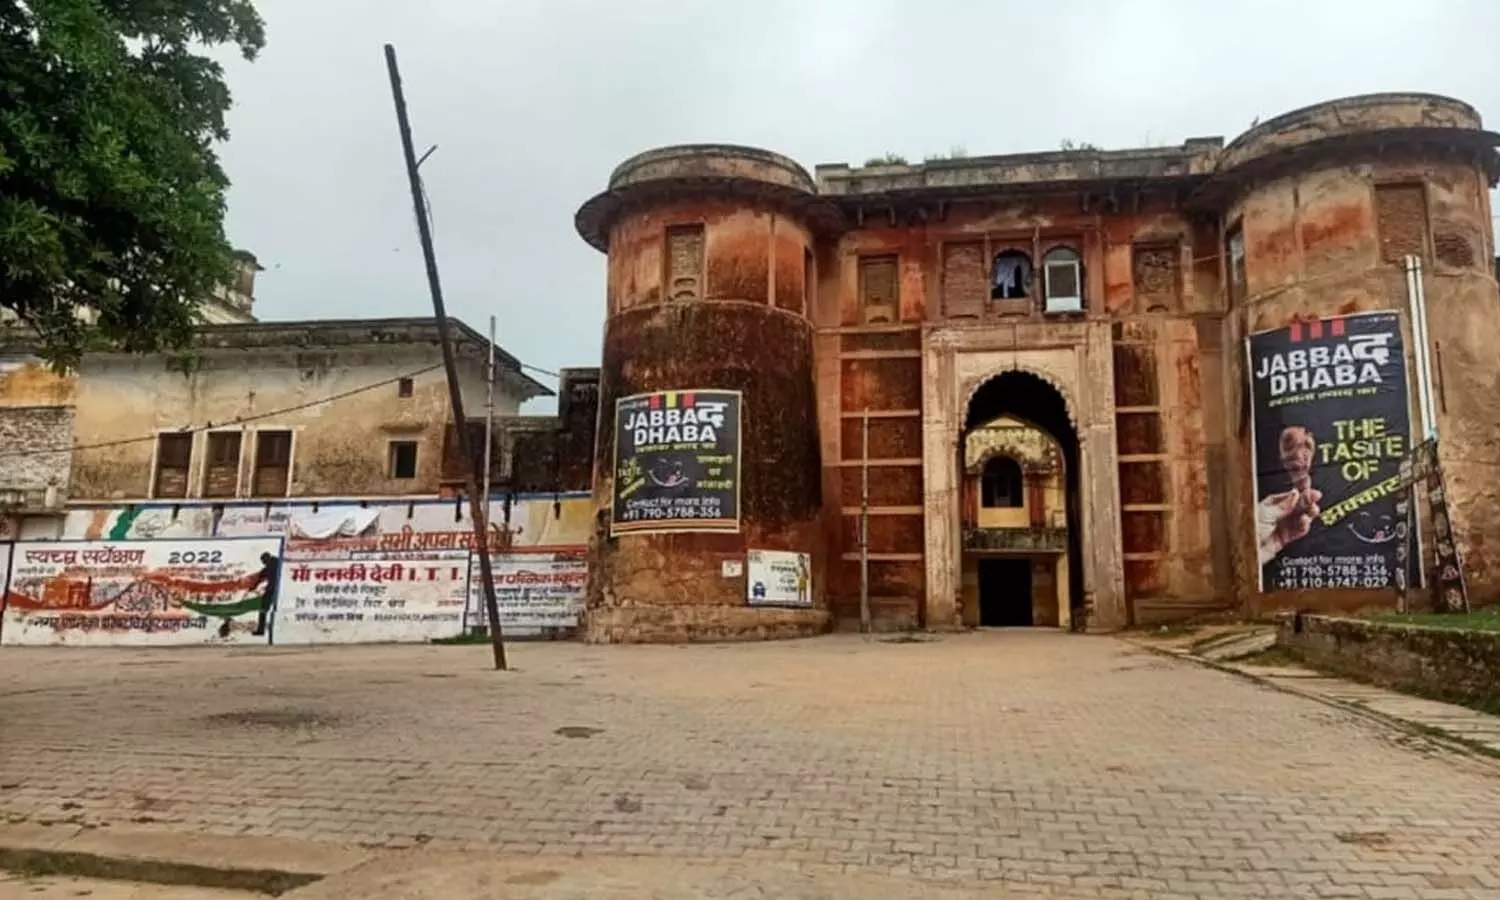 Ultimatum to vacate illegal occupier in historical building in Chitrakoot